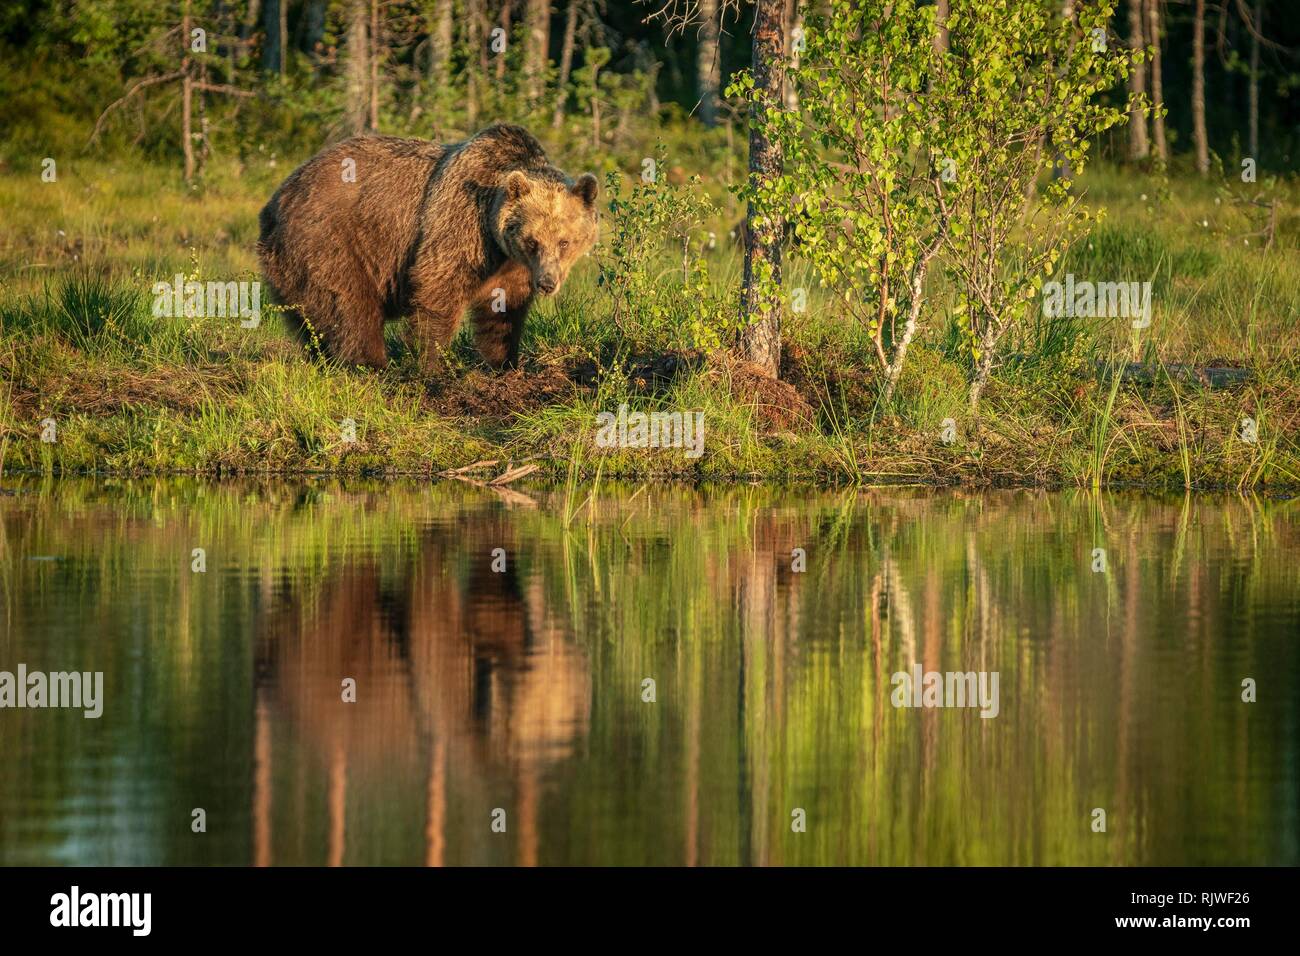 European brown bear (Ursus arctos) standing on the lake shore, reflected in the lake, Suomussalmi, Kainuu, Finland Stock Photo